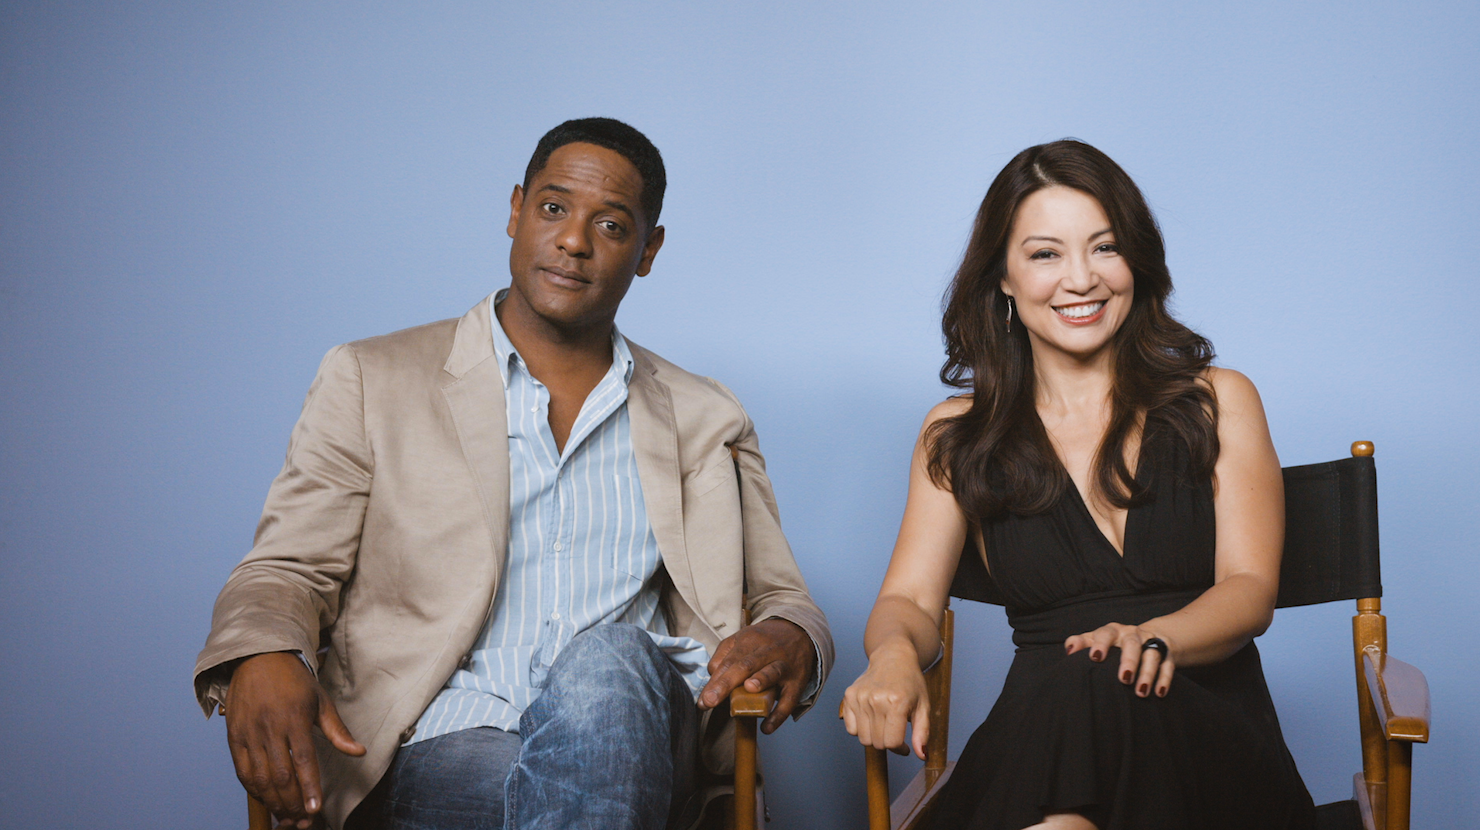 Ming-Na Wen and Blair Underwood - Marvel's Agents of SHIELD cast